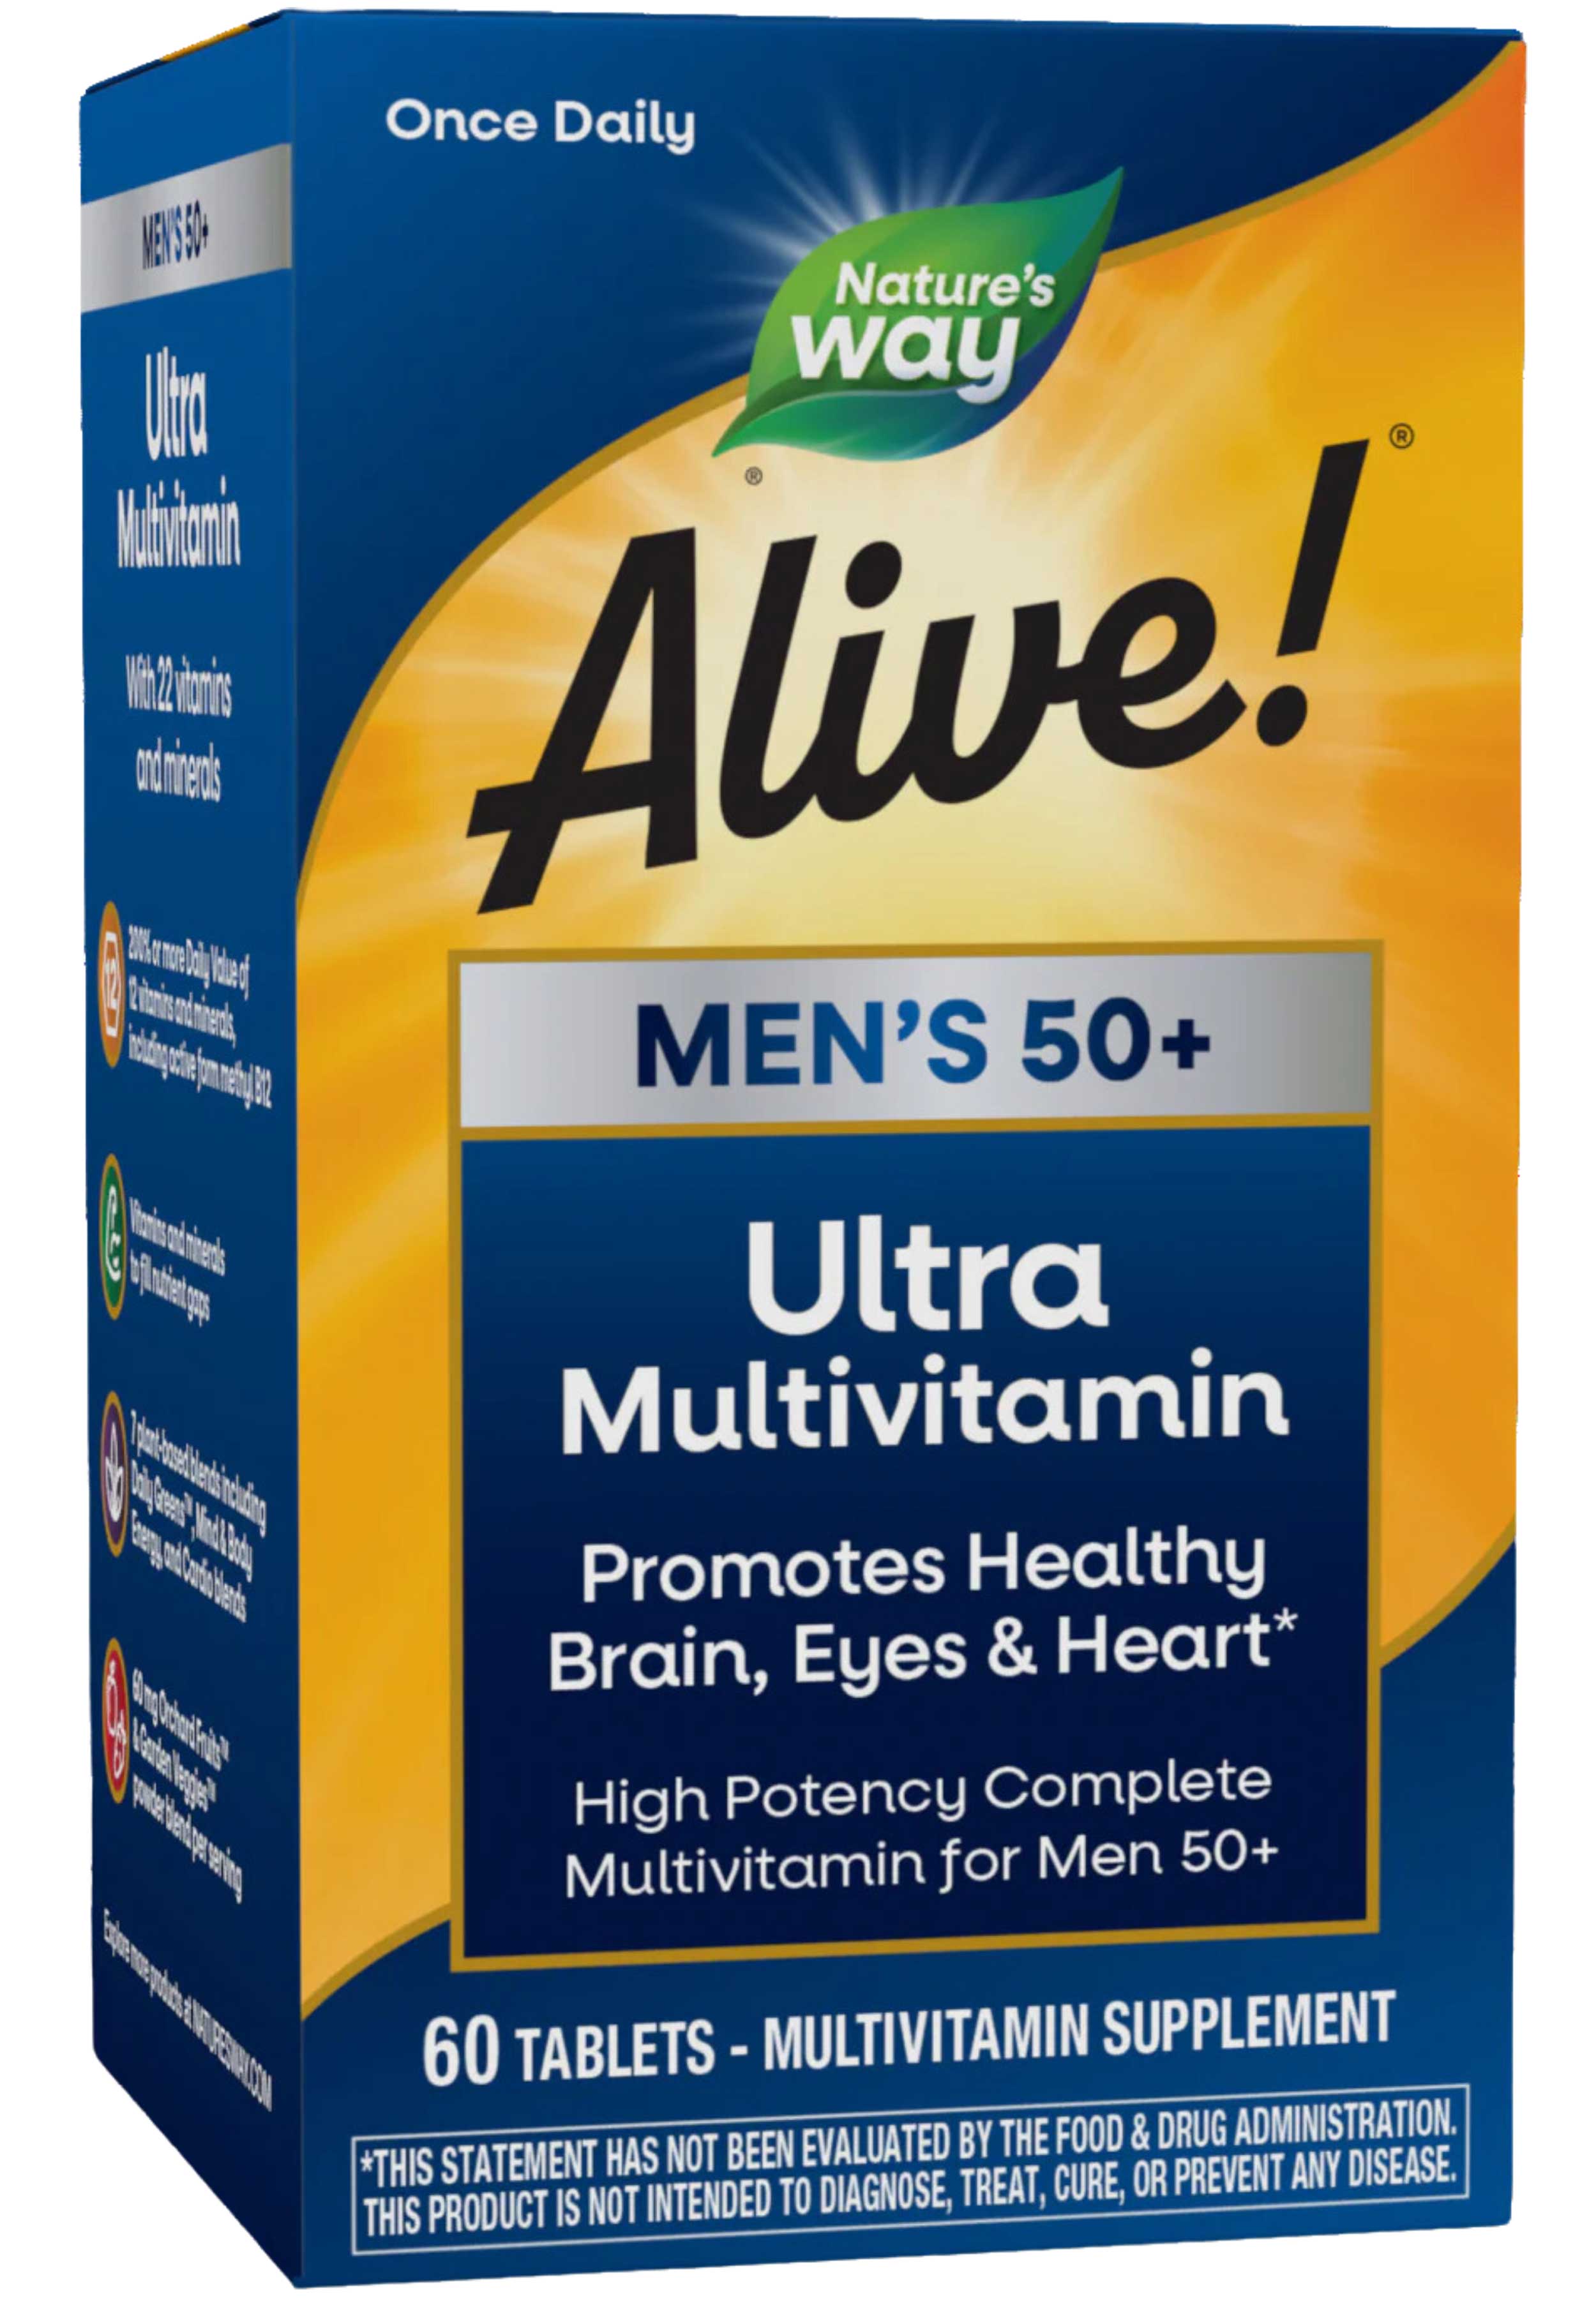 Nature's Way Alive! Once Daily Men's 50+ Ultra Potency